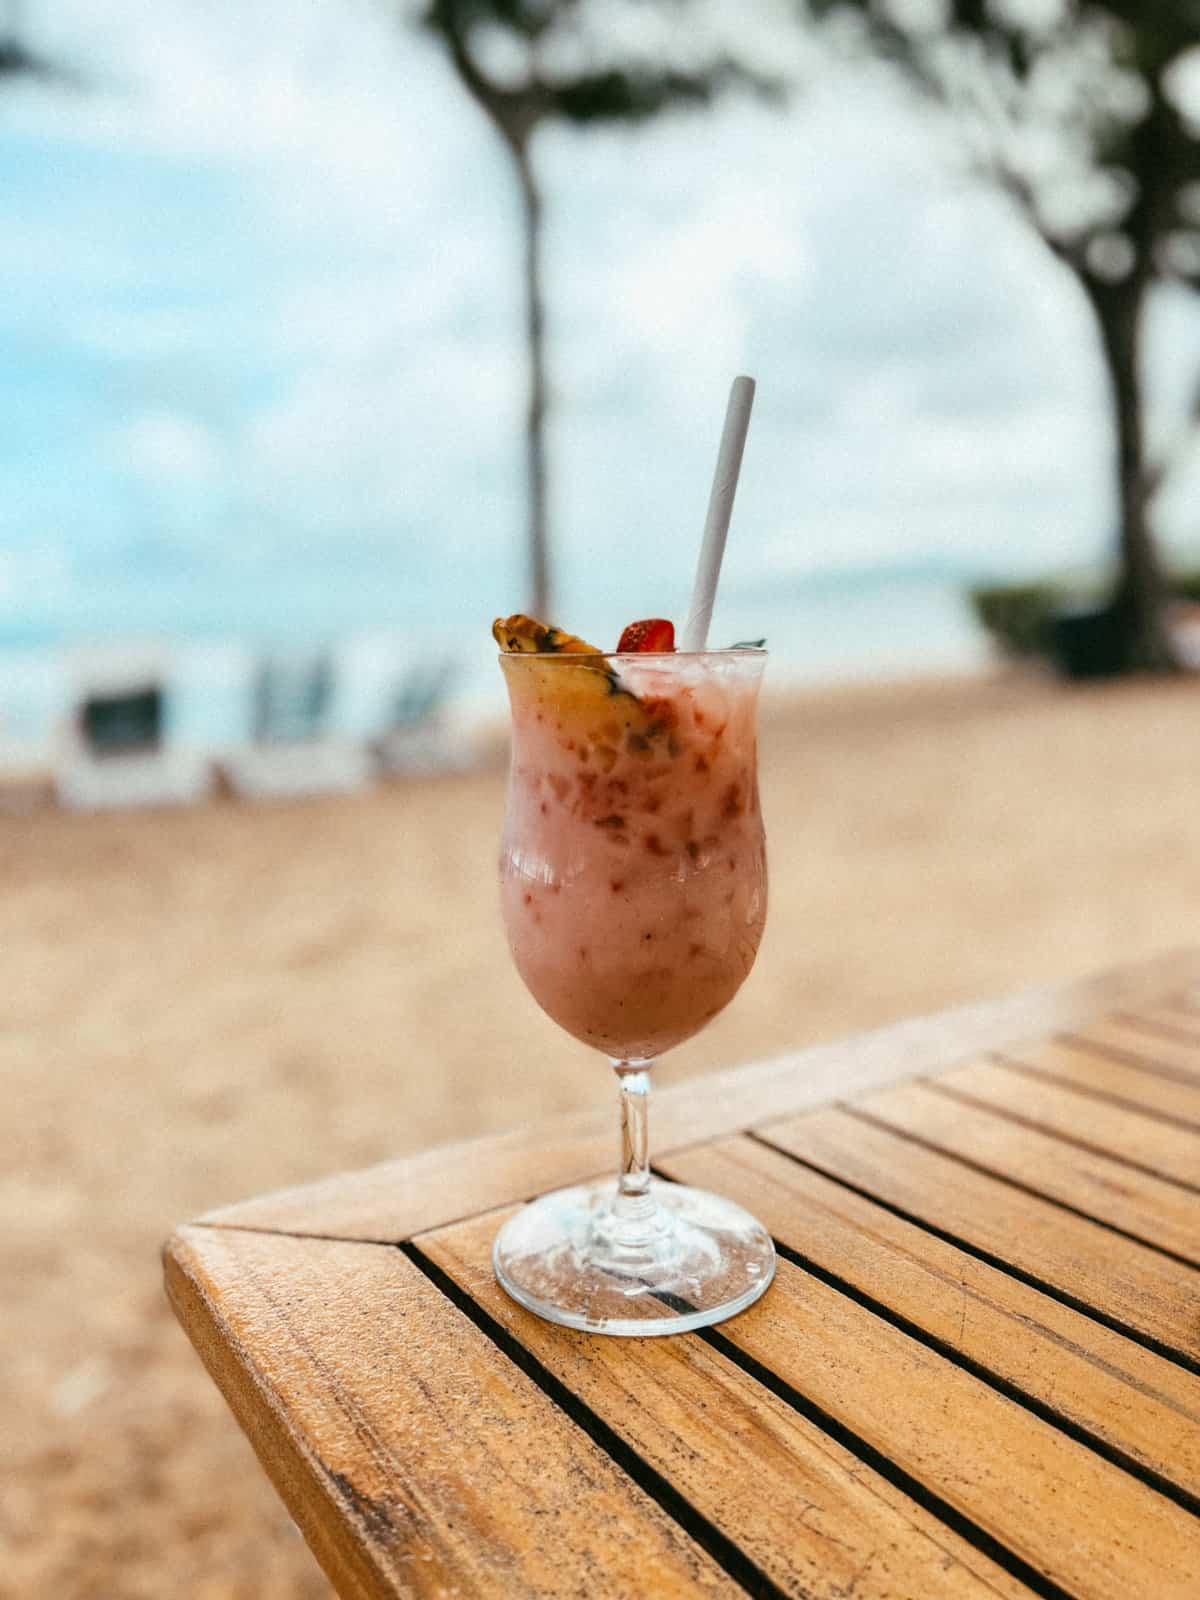 A strawberry and pineapple cocktail served with the ocean in the background.